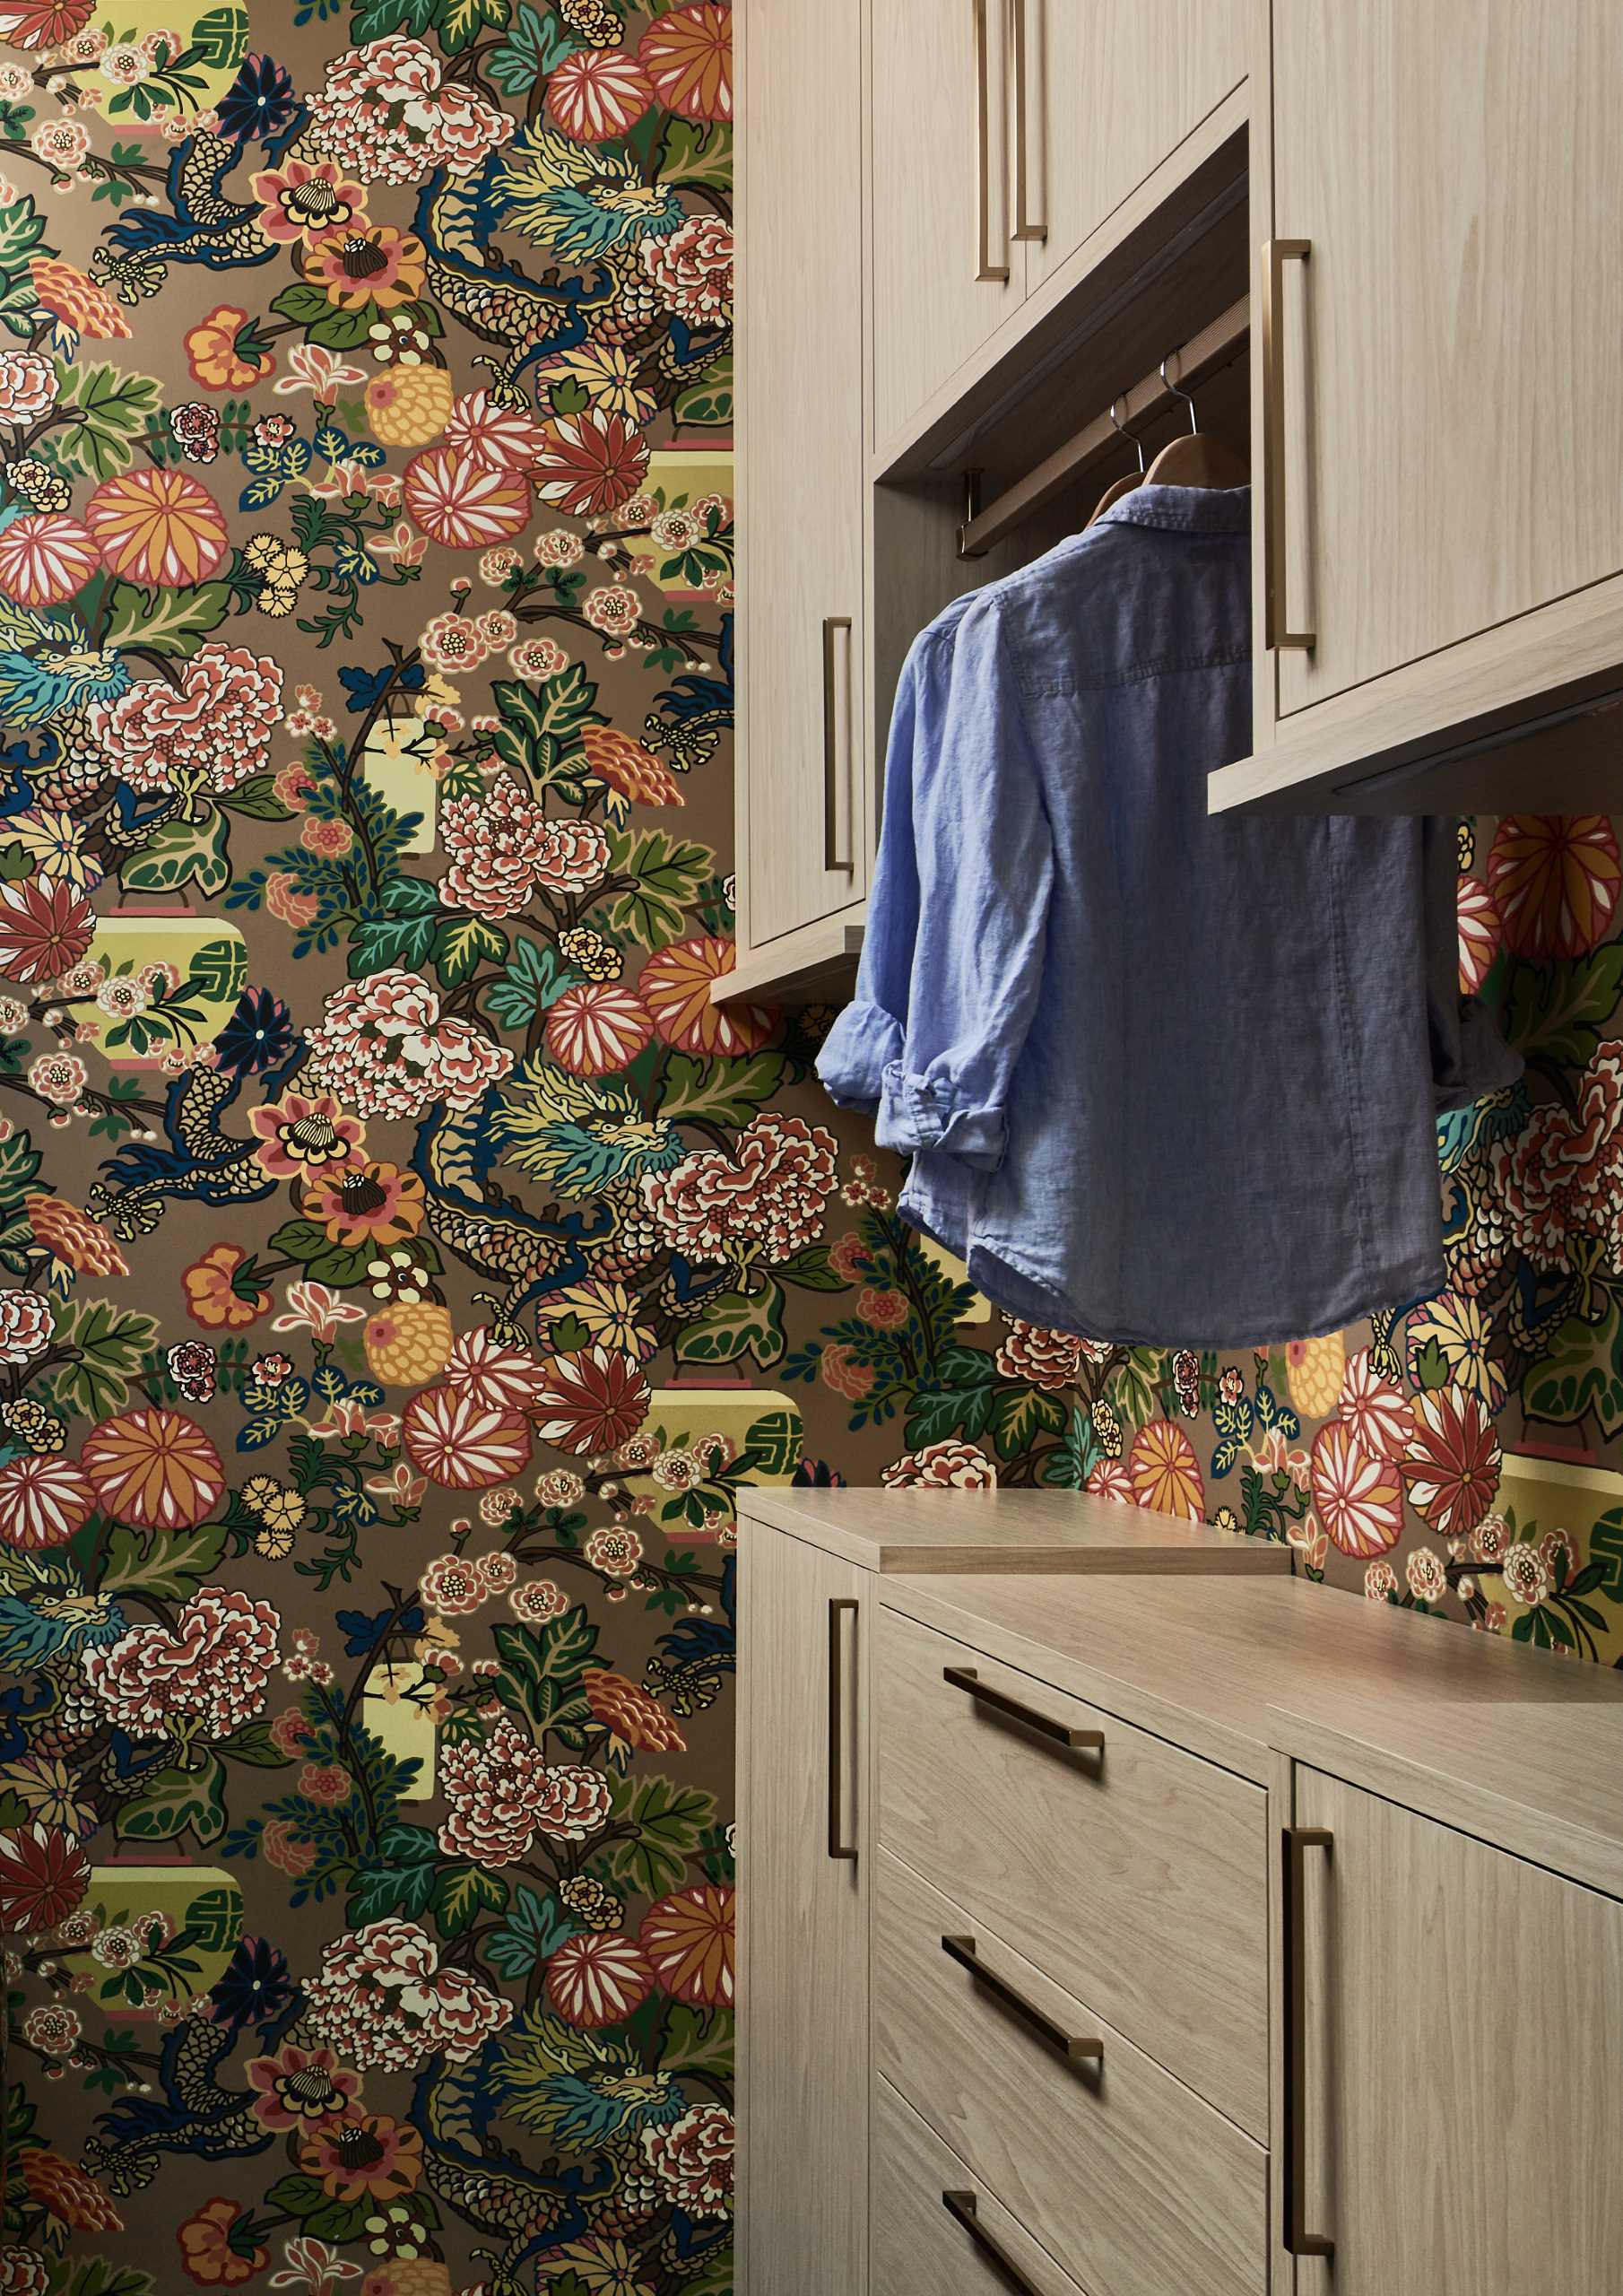 A colorful wallpaper print livens up this laundry room.